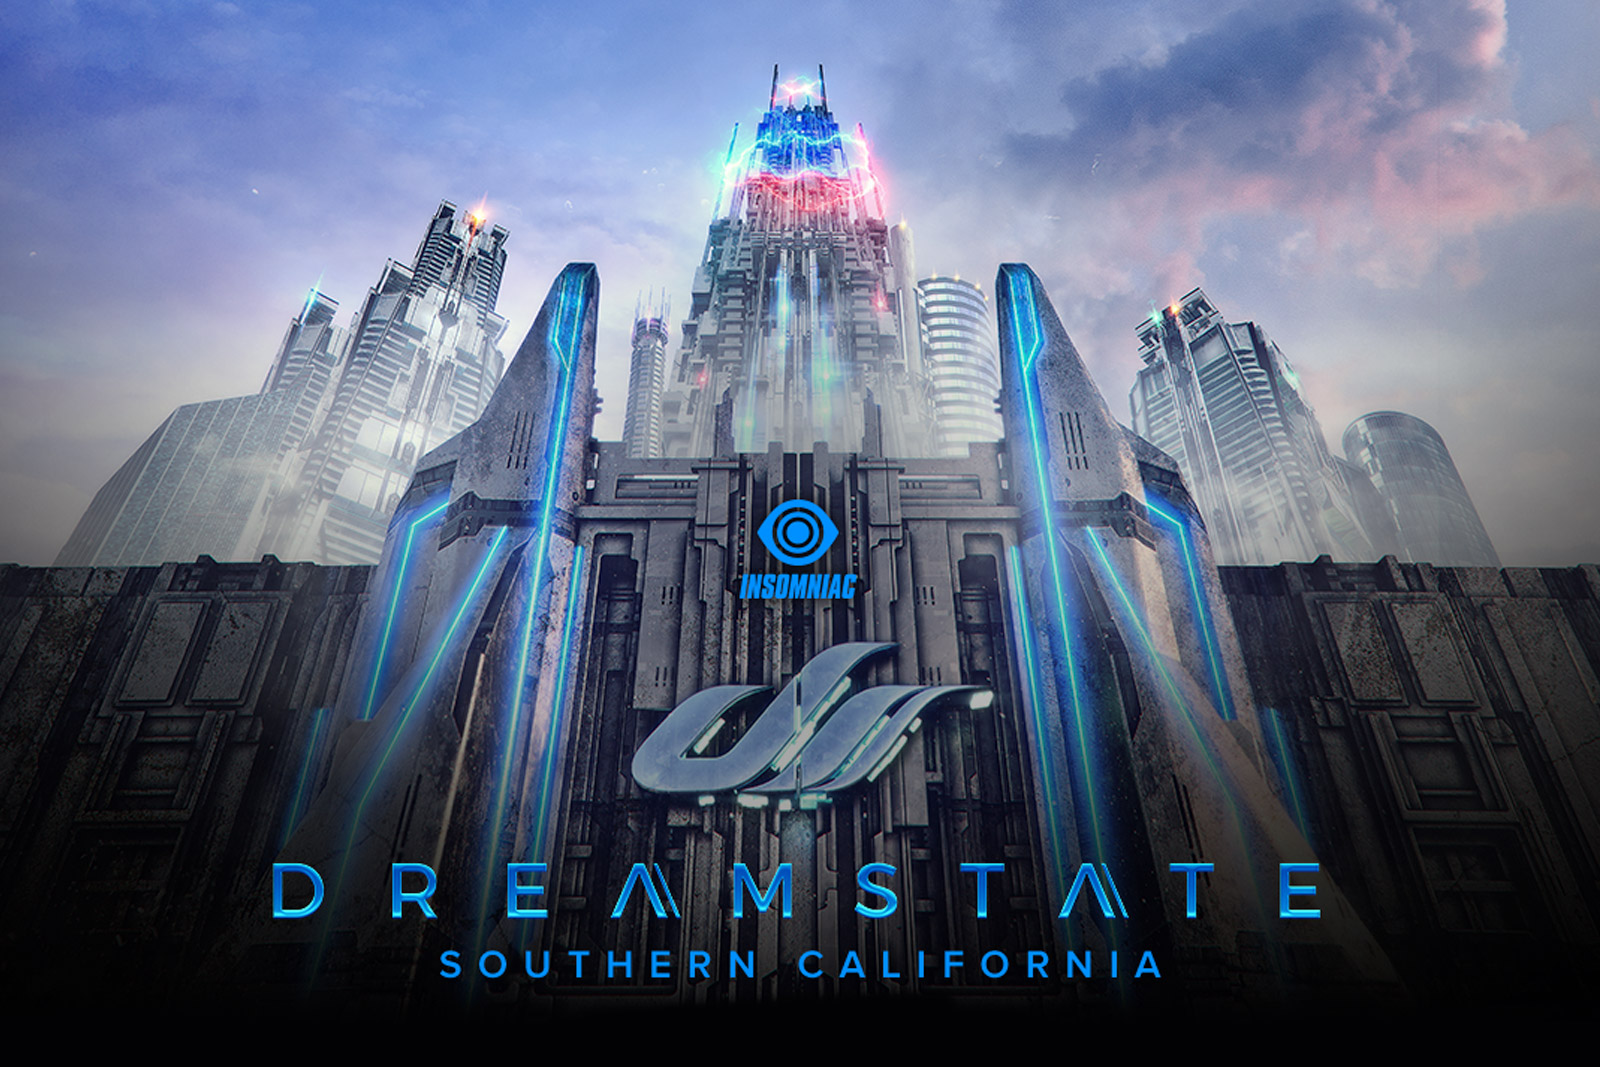 dreamstate-socal-2018-lineup-poster-oz-edm-feature